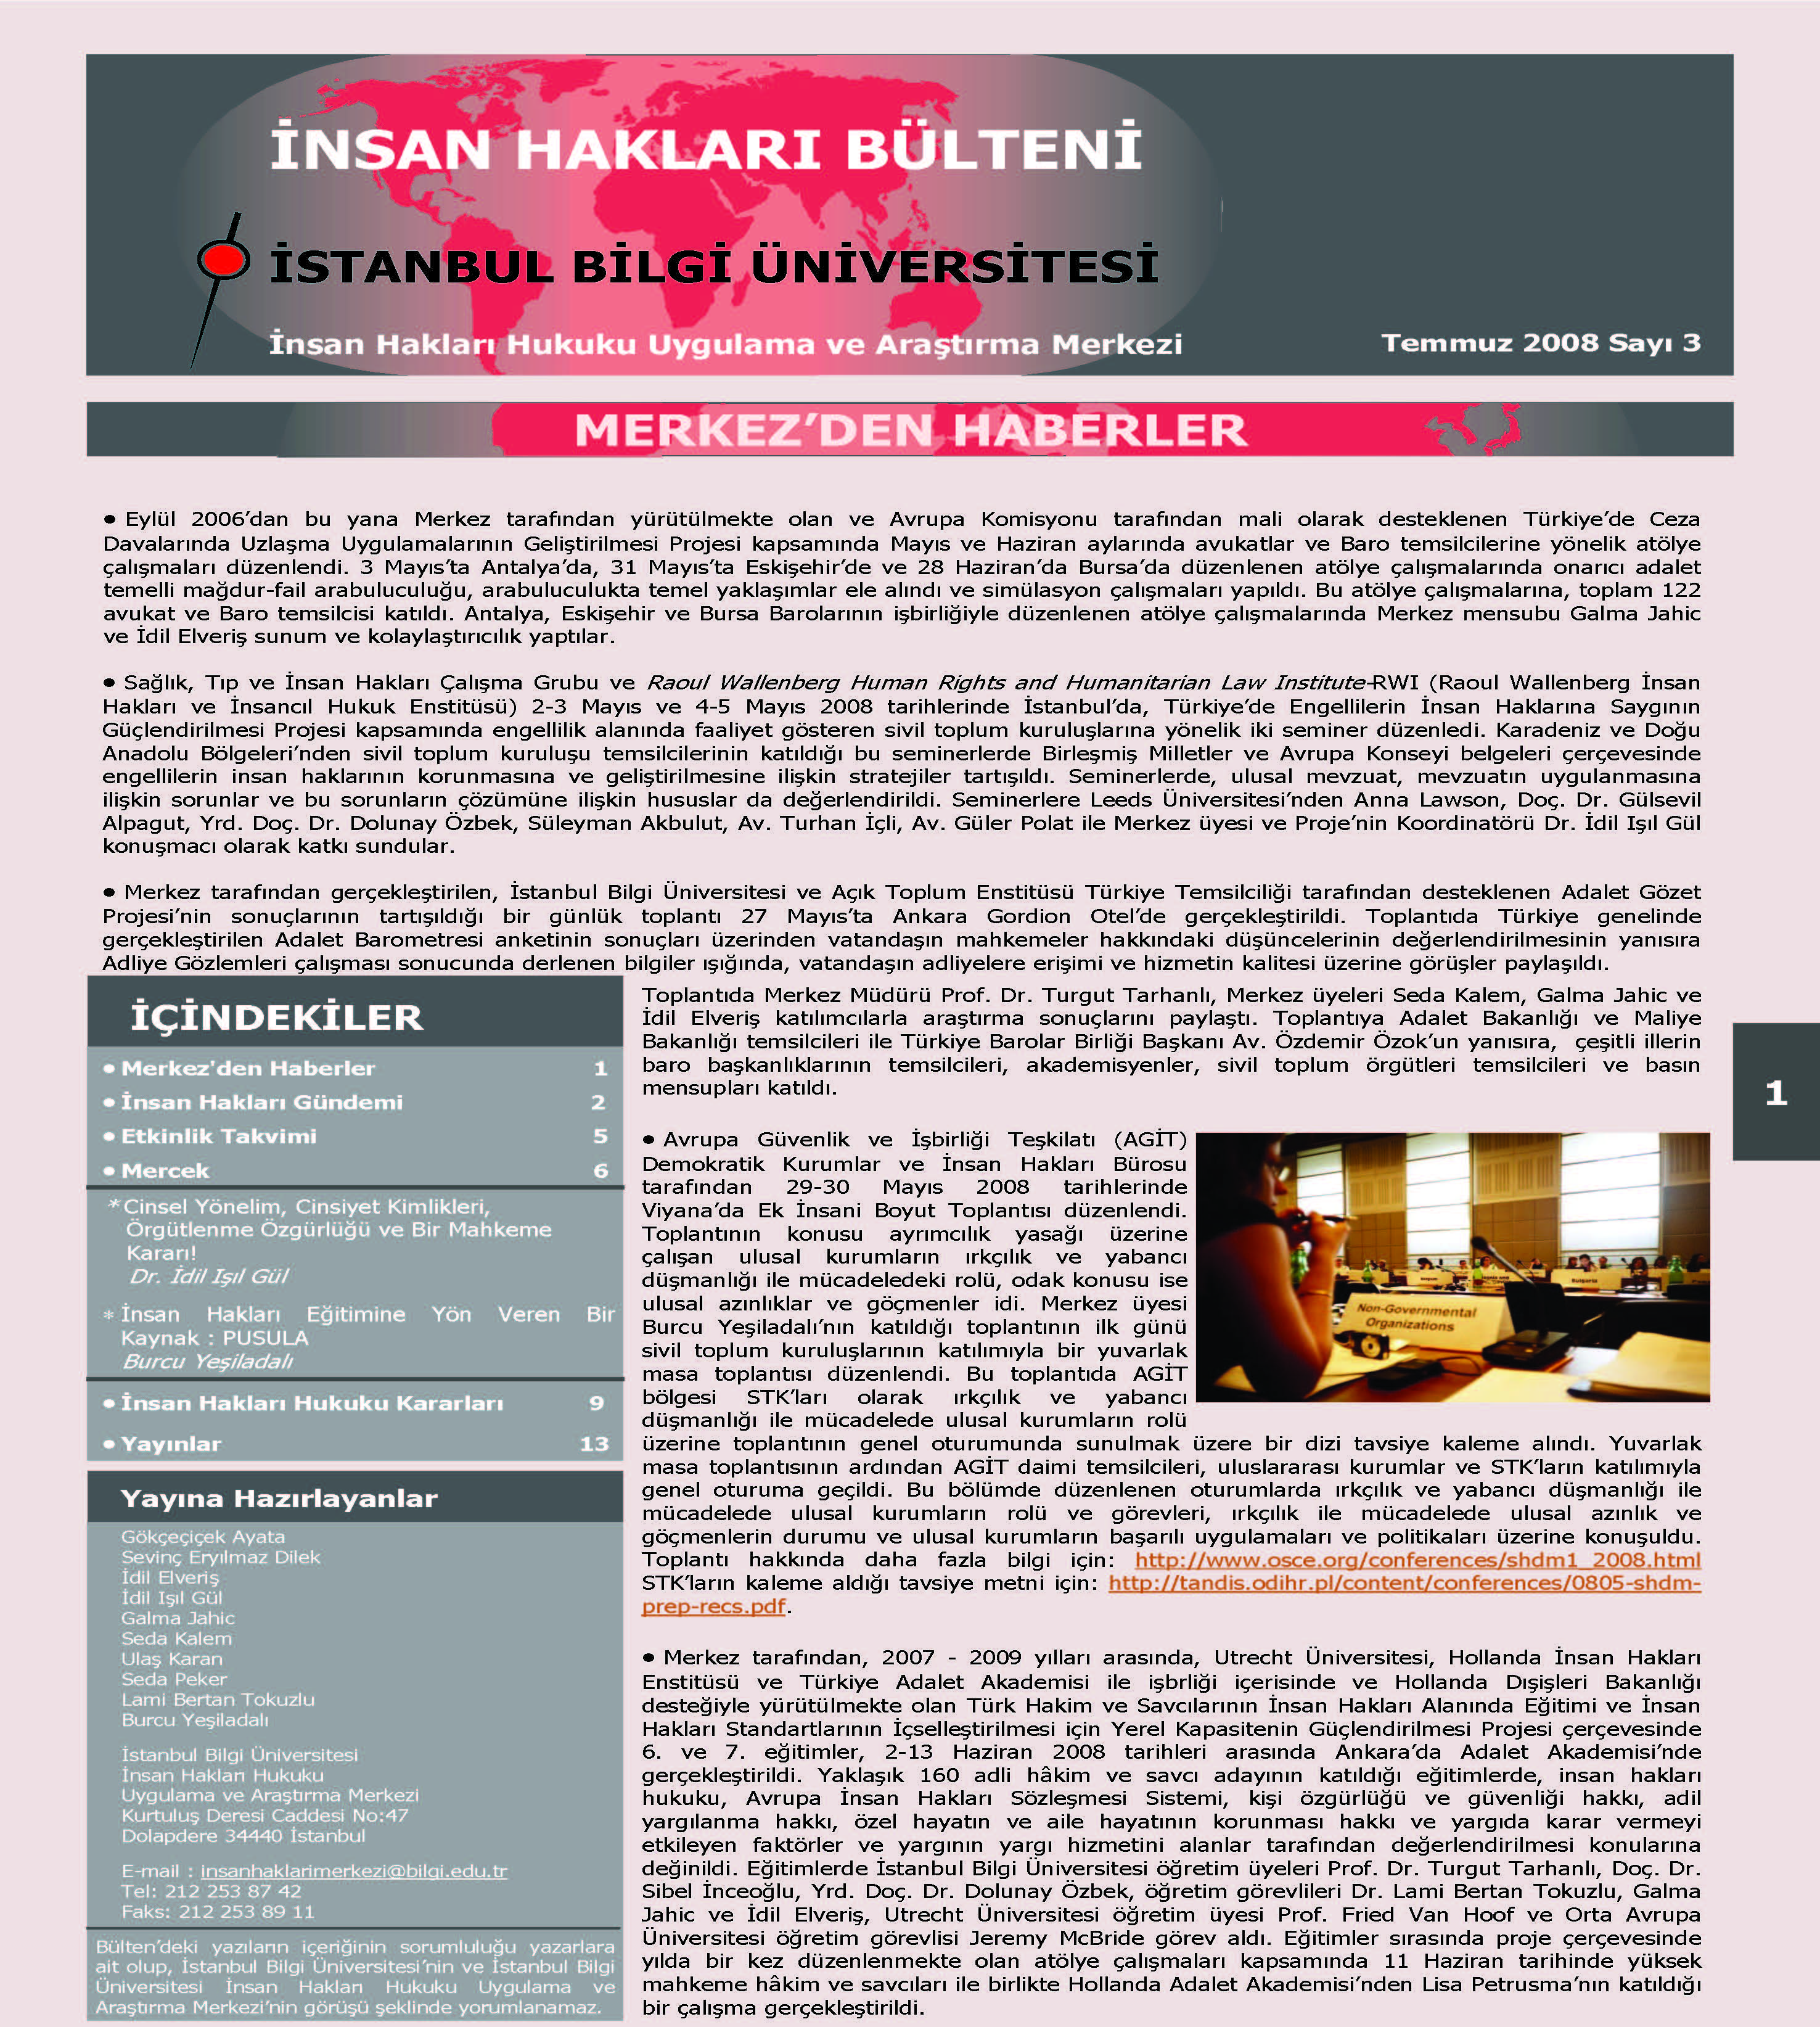 Human Rights Bulletin, July 2008, Issue 3